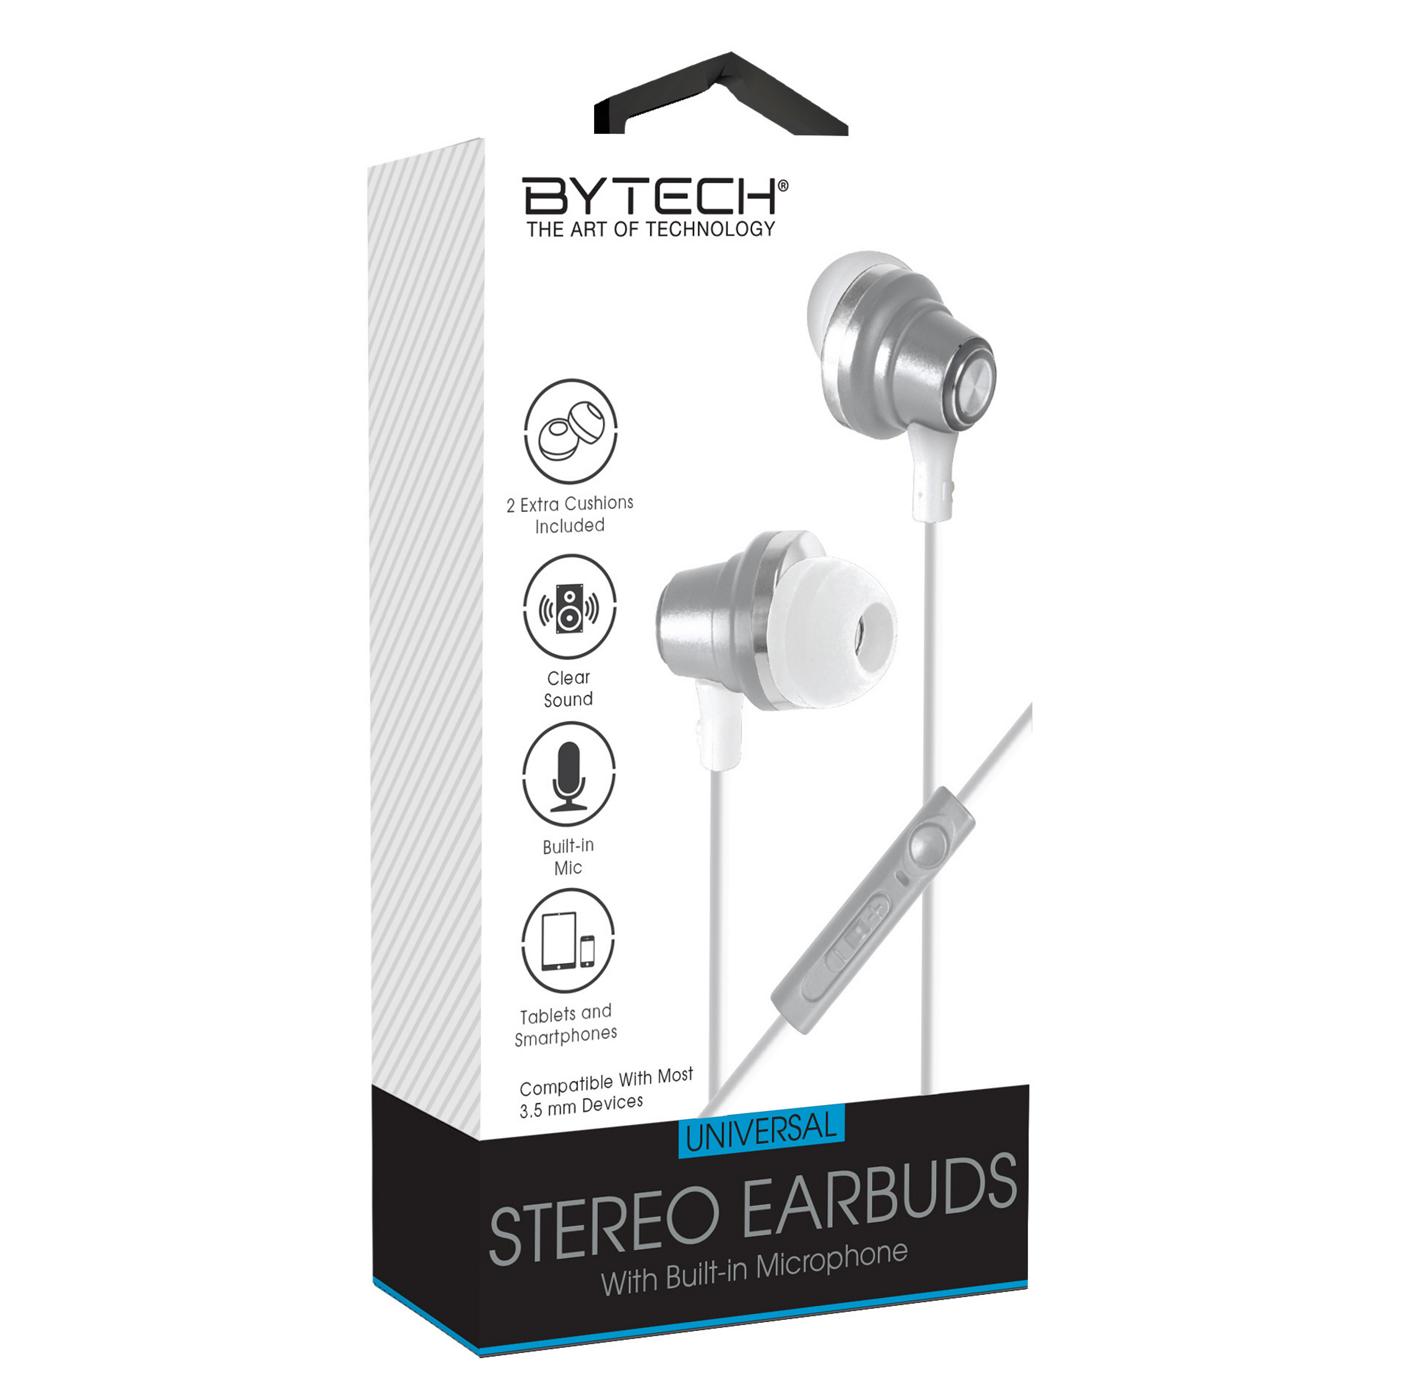 Bytech Stereo Earbuds; image 2 of 2